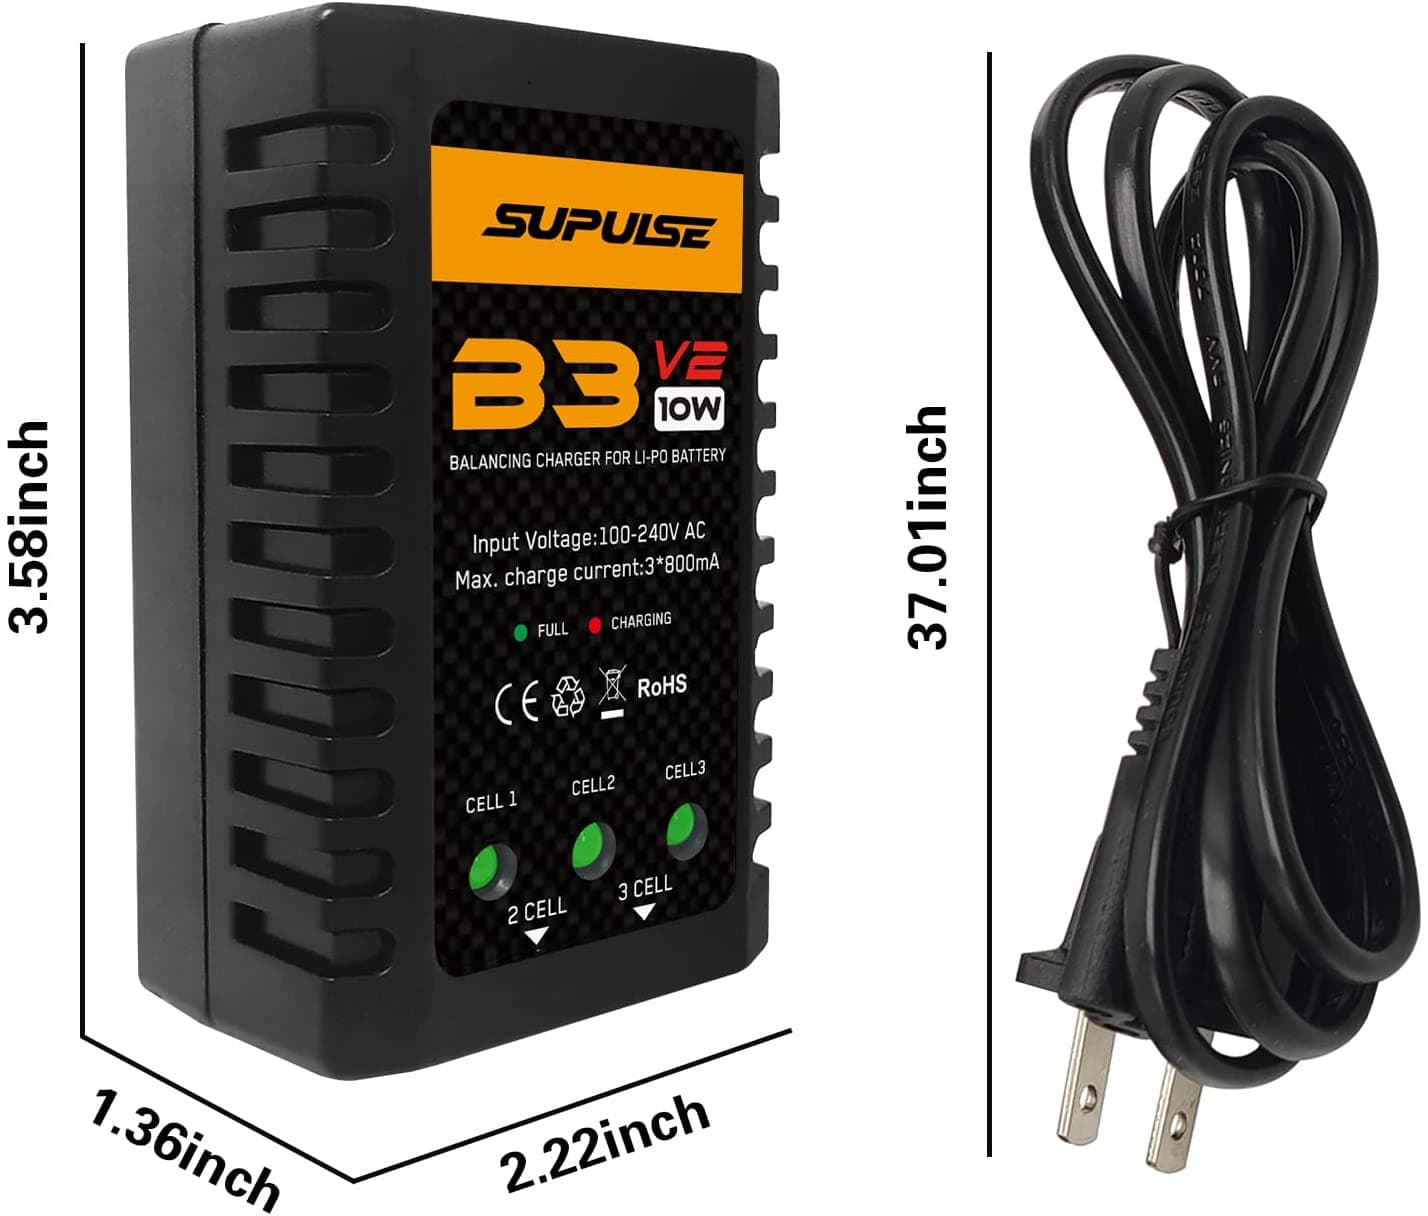 SUPULSE LiPo Battery Charger RC Balance Charger AC 7.4-11.1V 2S-3S 10W Upgrade Version B3AC Pro Compact Charger Lipo Charger (B3V2) - EXHOBBY